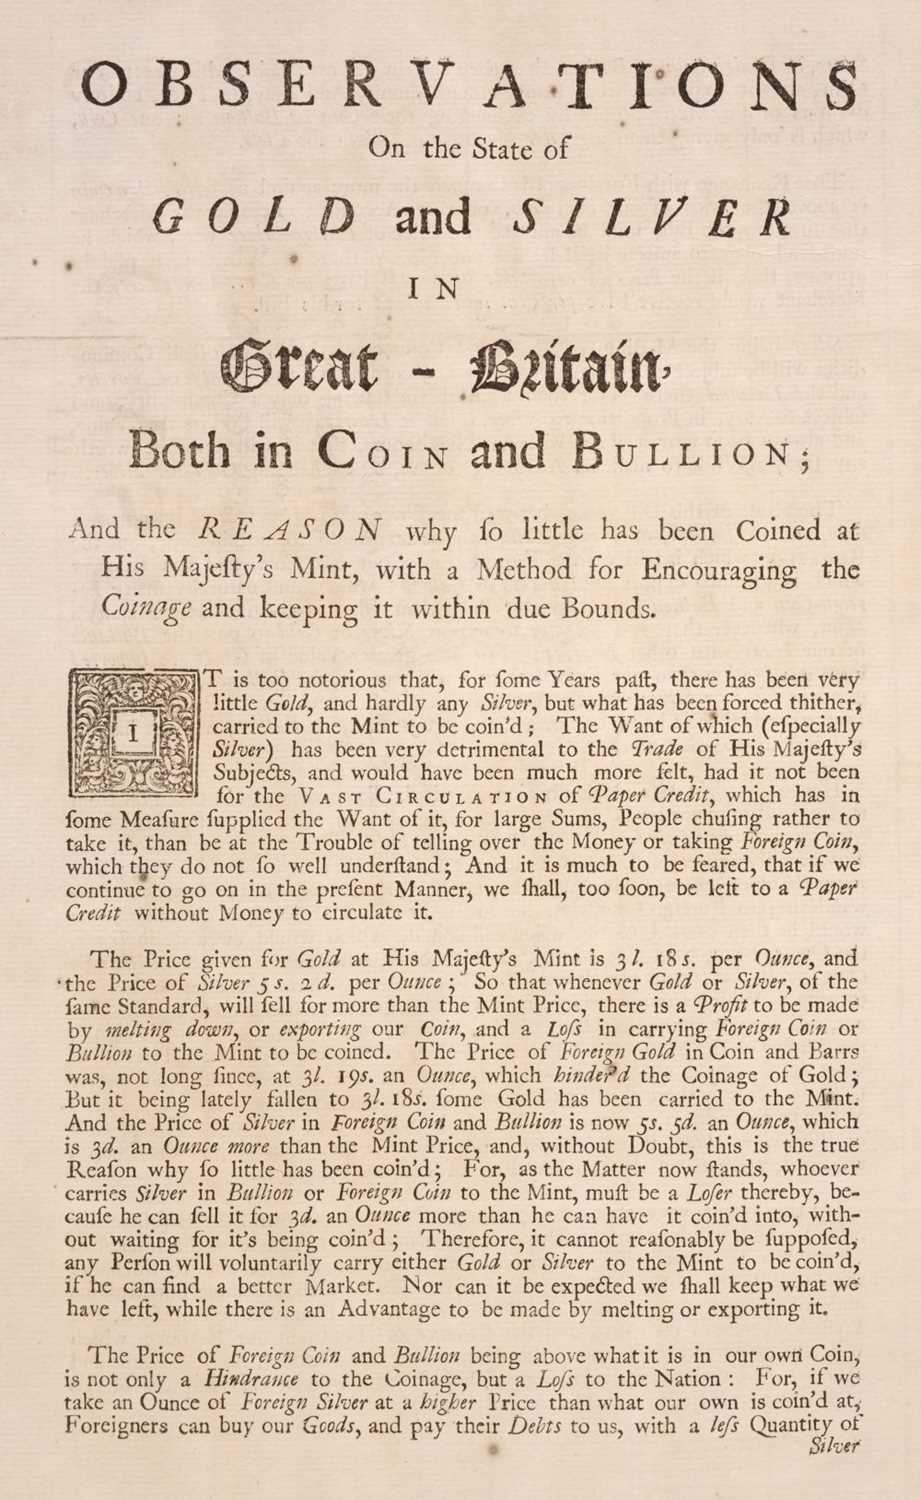 Lot 331 - Economics. Observations on the state of gold and silver in Great-Britain, both in coin and bullion, [1730]